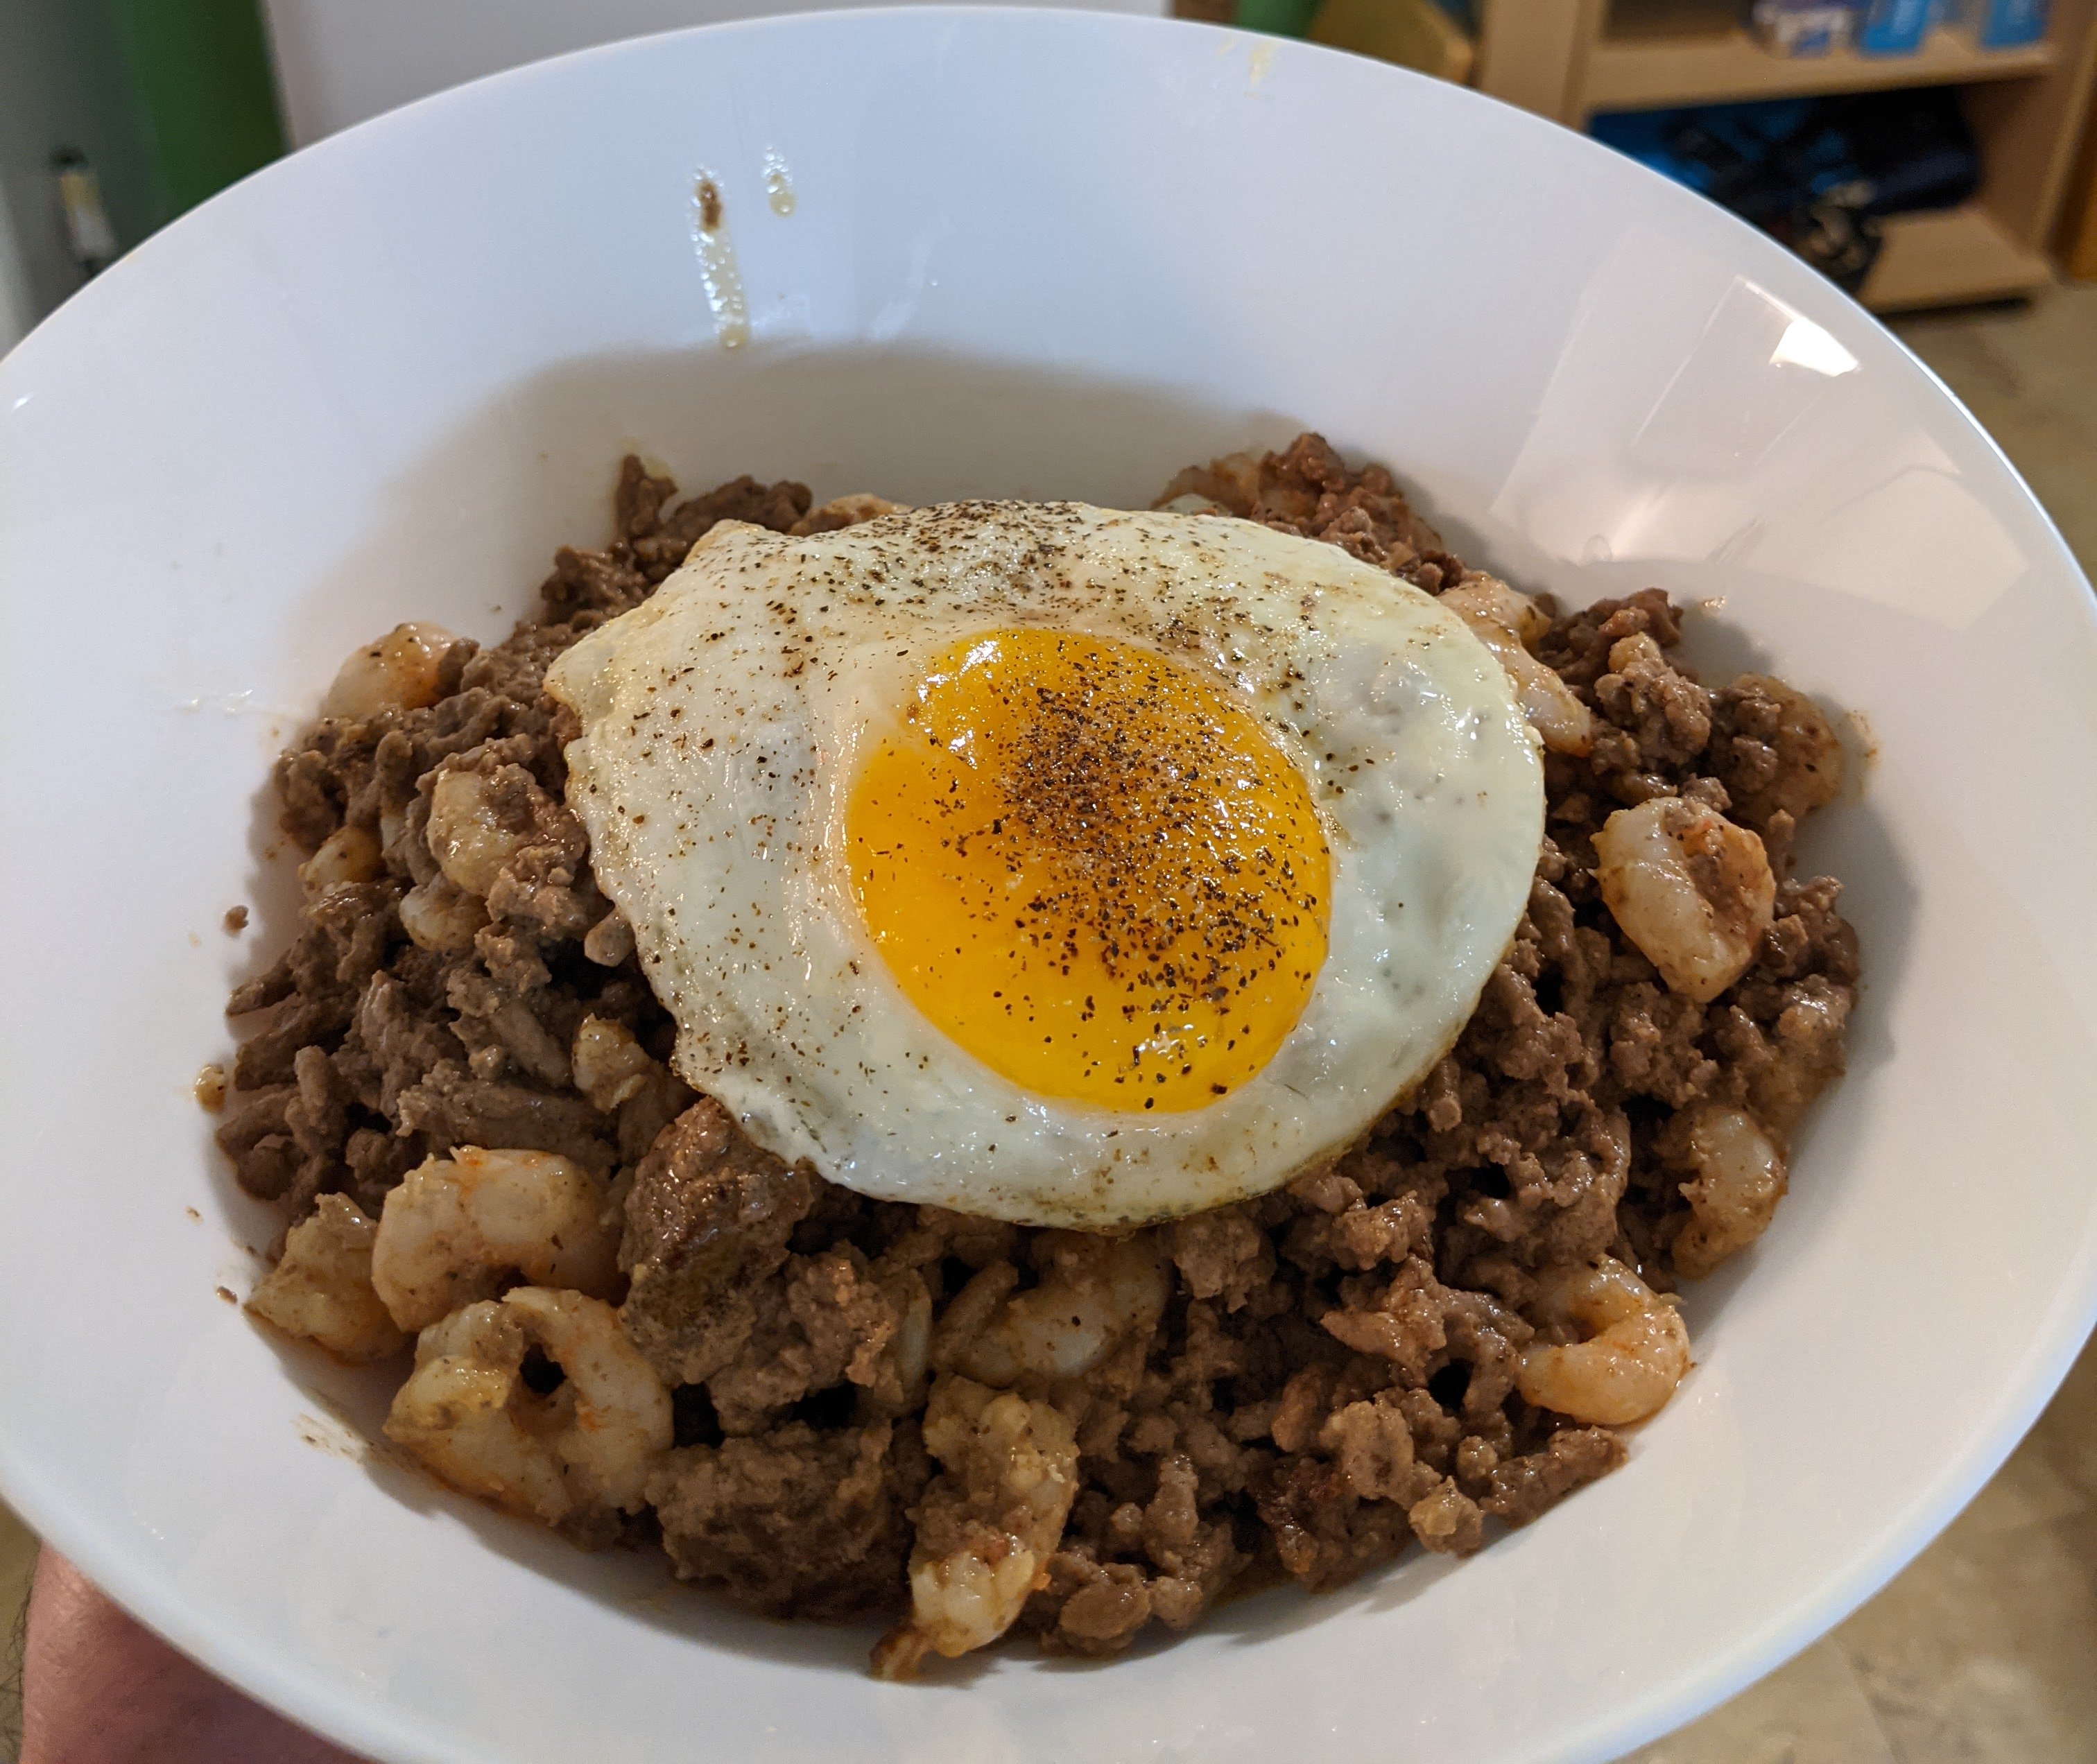 /nix/store/vqpbs150zz0qr6ika3x0h198s0q8s5db-54dj8qc7q6gz2dzxg3h405mg3wjymfcg-source/Ref/Carnivore diet/Recipes/ground-meat-cereal-egg.jpg